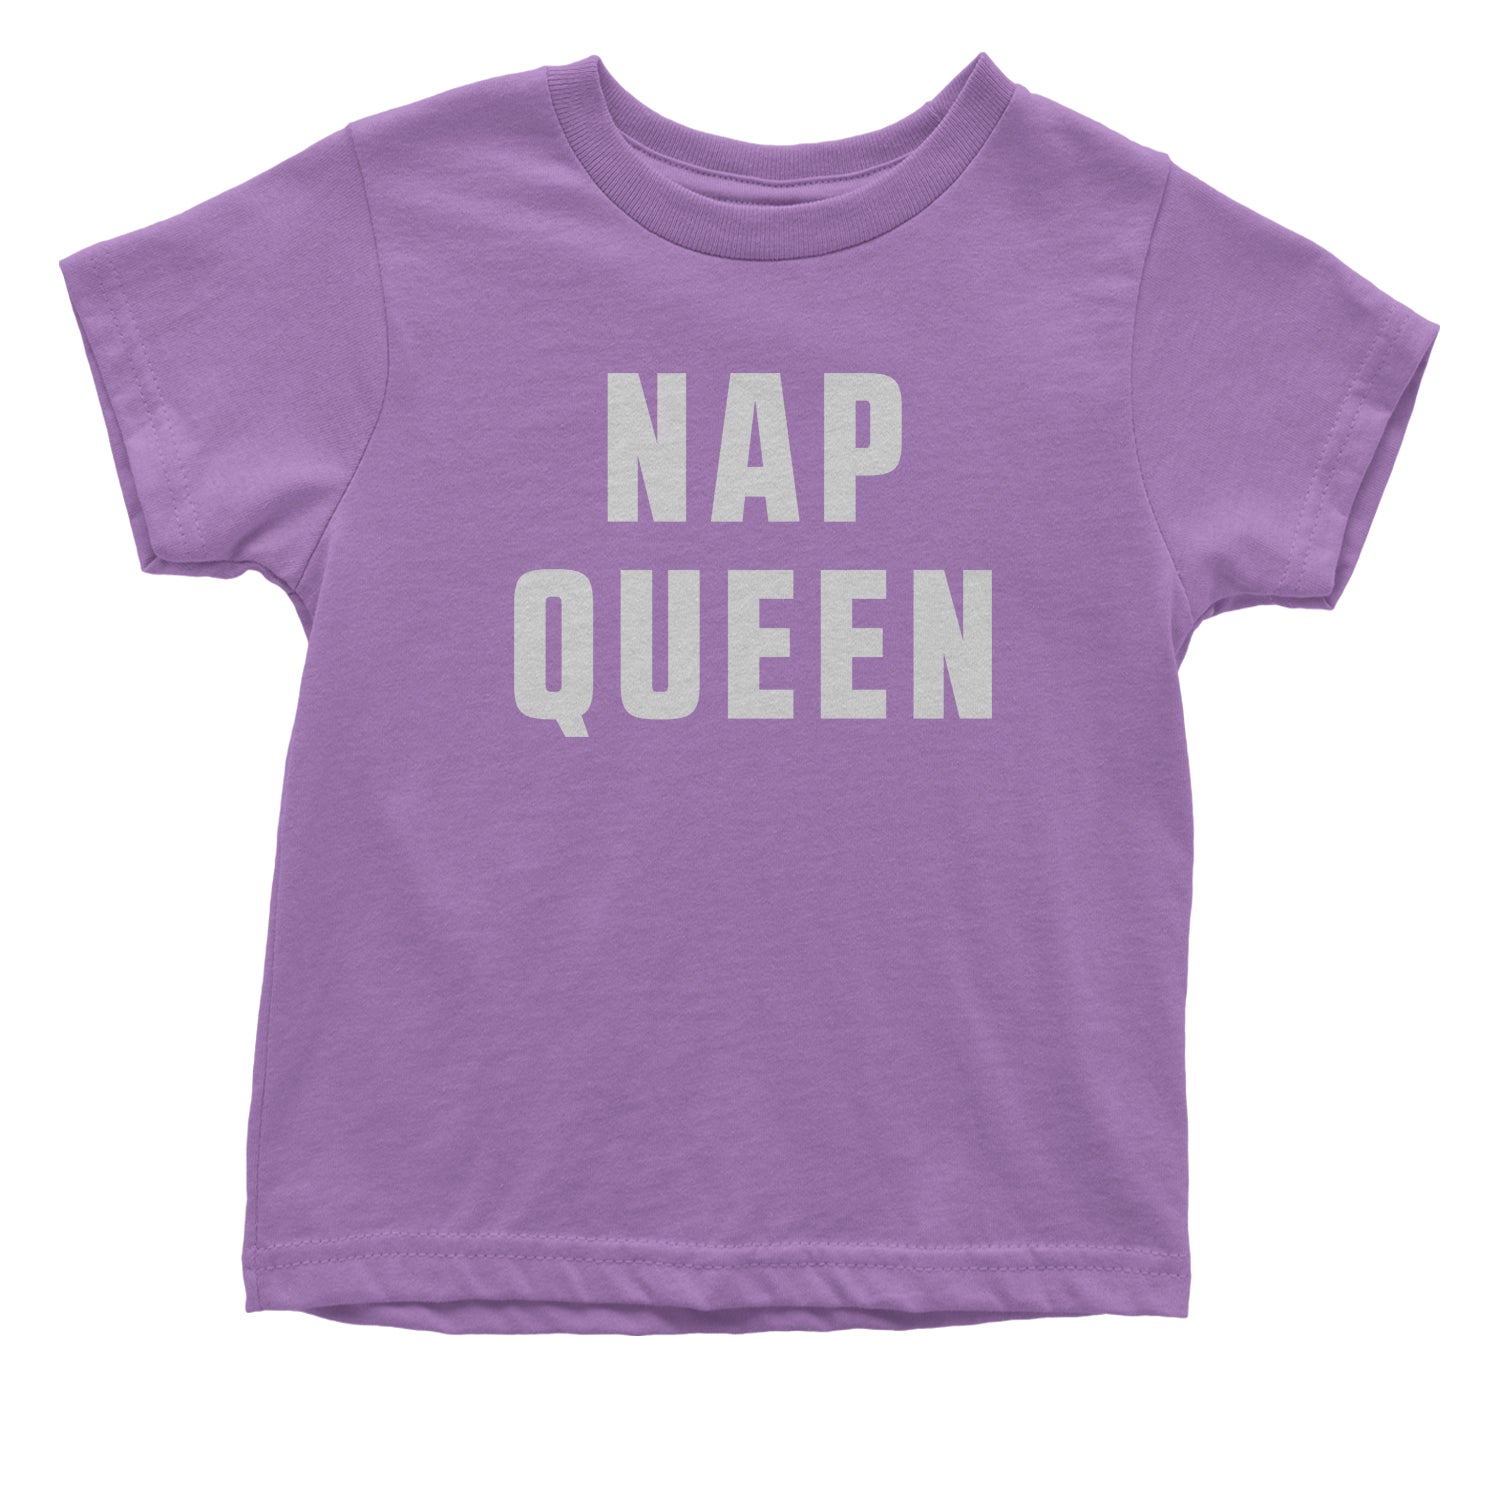 Nap Queen (White Print) Comfy Top For Lazy Days Toddler T-Shirt all, day, function, lazy, nap, pajamas, queen, siesta, sleep, tired, to, too by Expression Tees